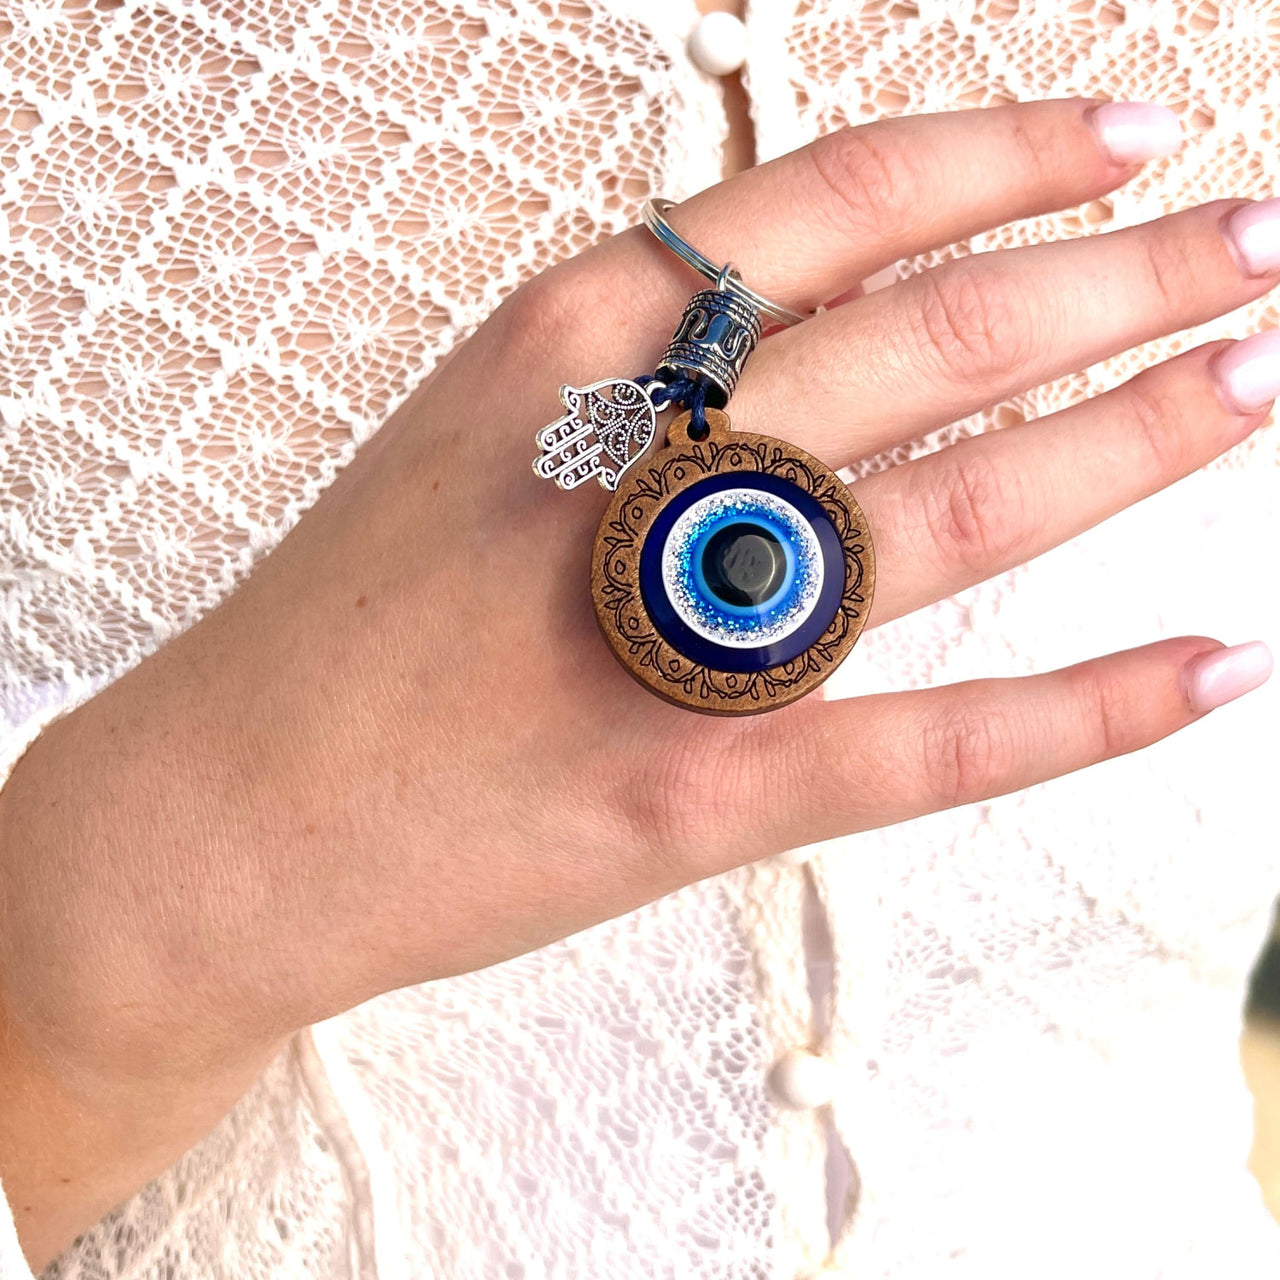 A woman wearing a white lace top and a blue eye charm from Evil Eye Keychain #Q198